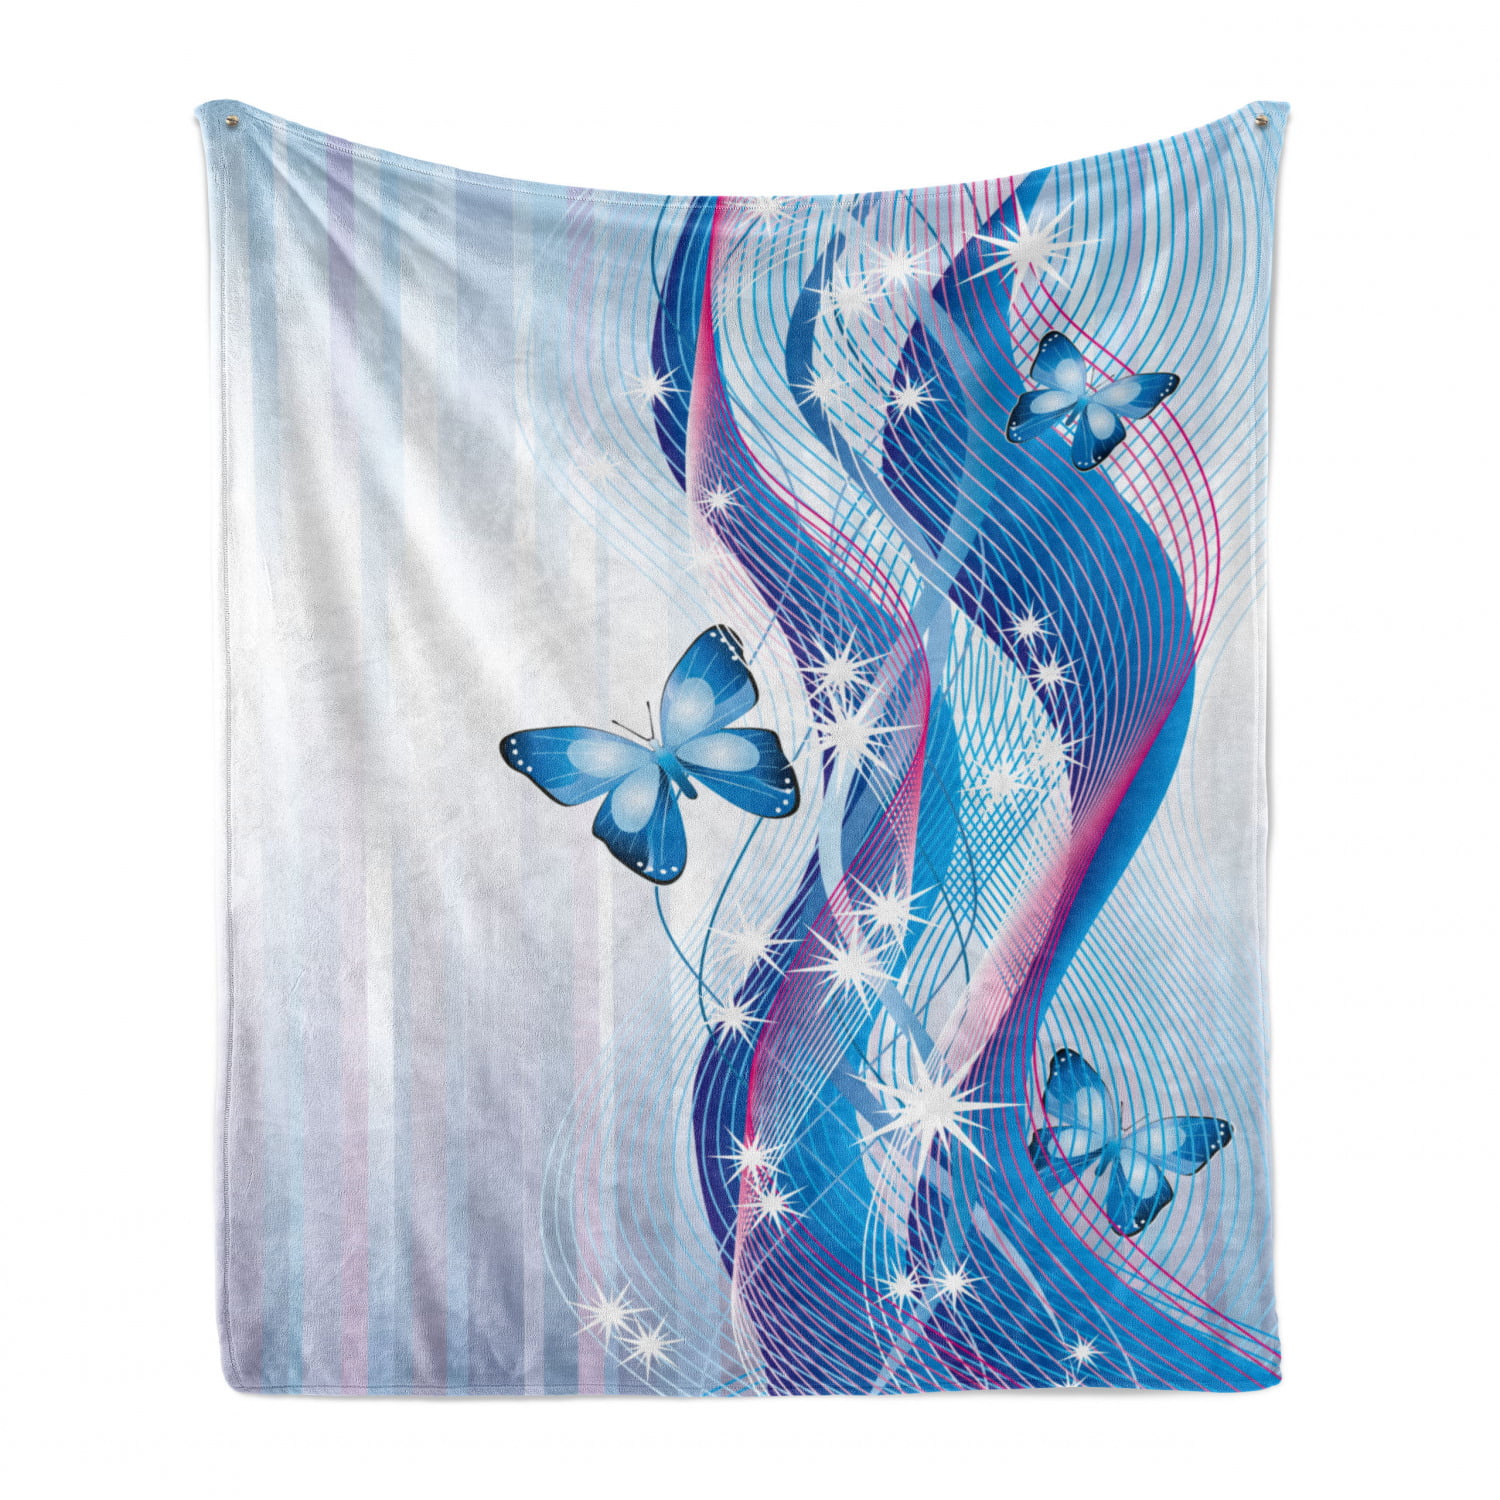 Blue Pink White Ambesonne Navy and Blush Soft Flannel Fleece Throw Blanket Cozy Plush for Indoor and Outdoor Use 50 x 60 Abstract Composition with Waves Stripes and Magic Butterflies 